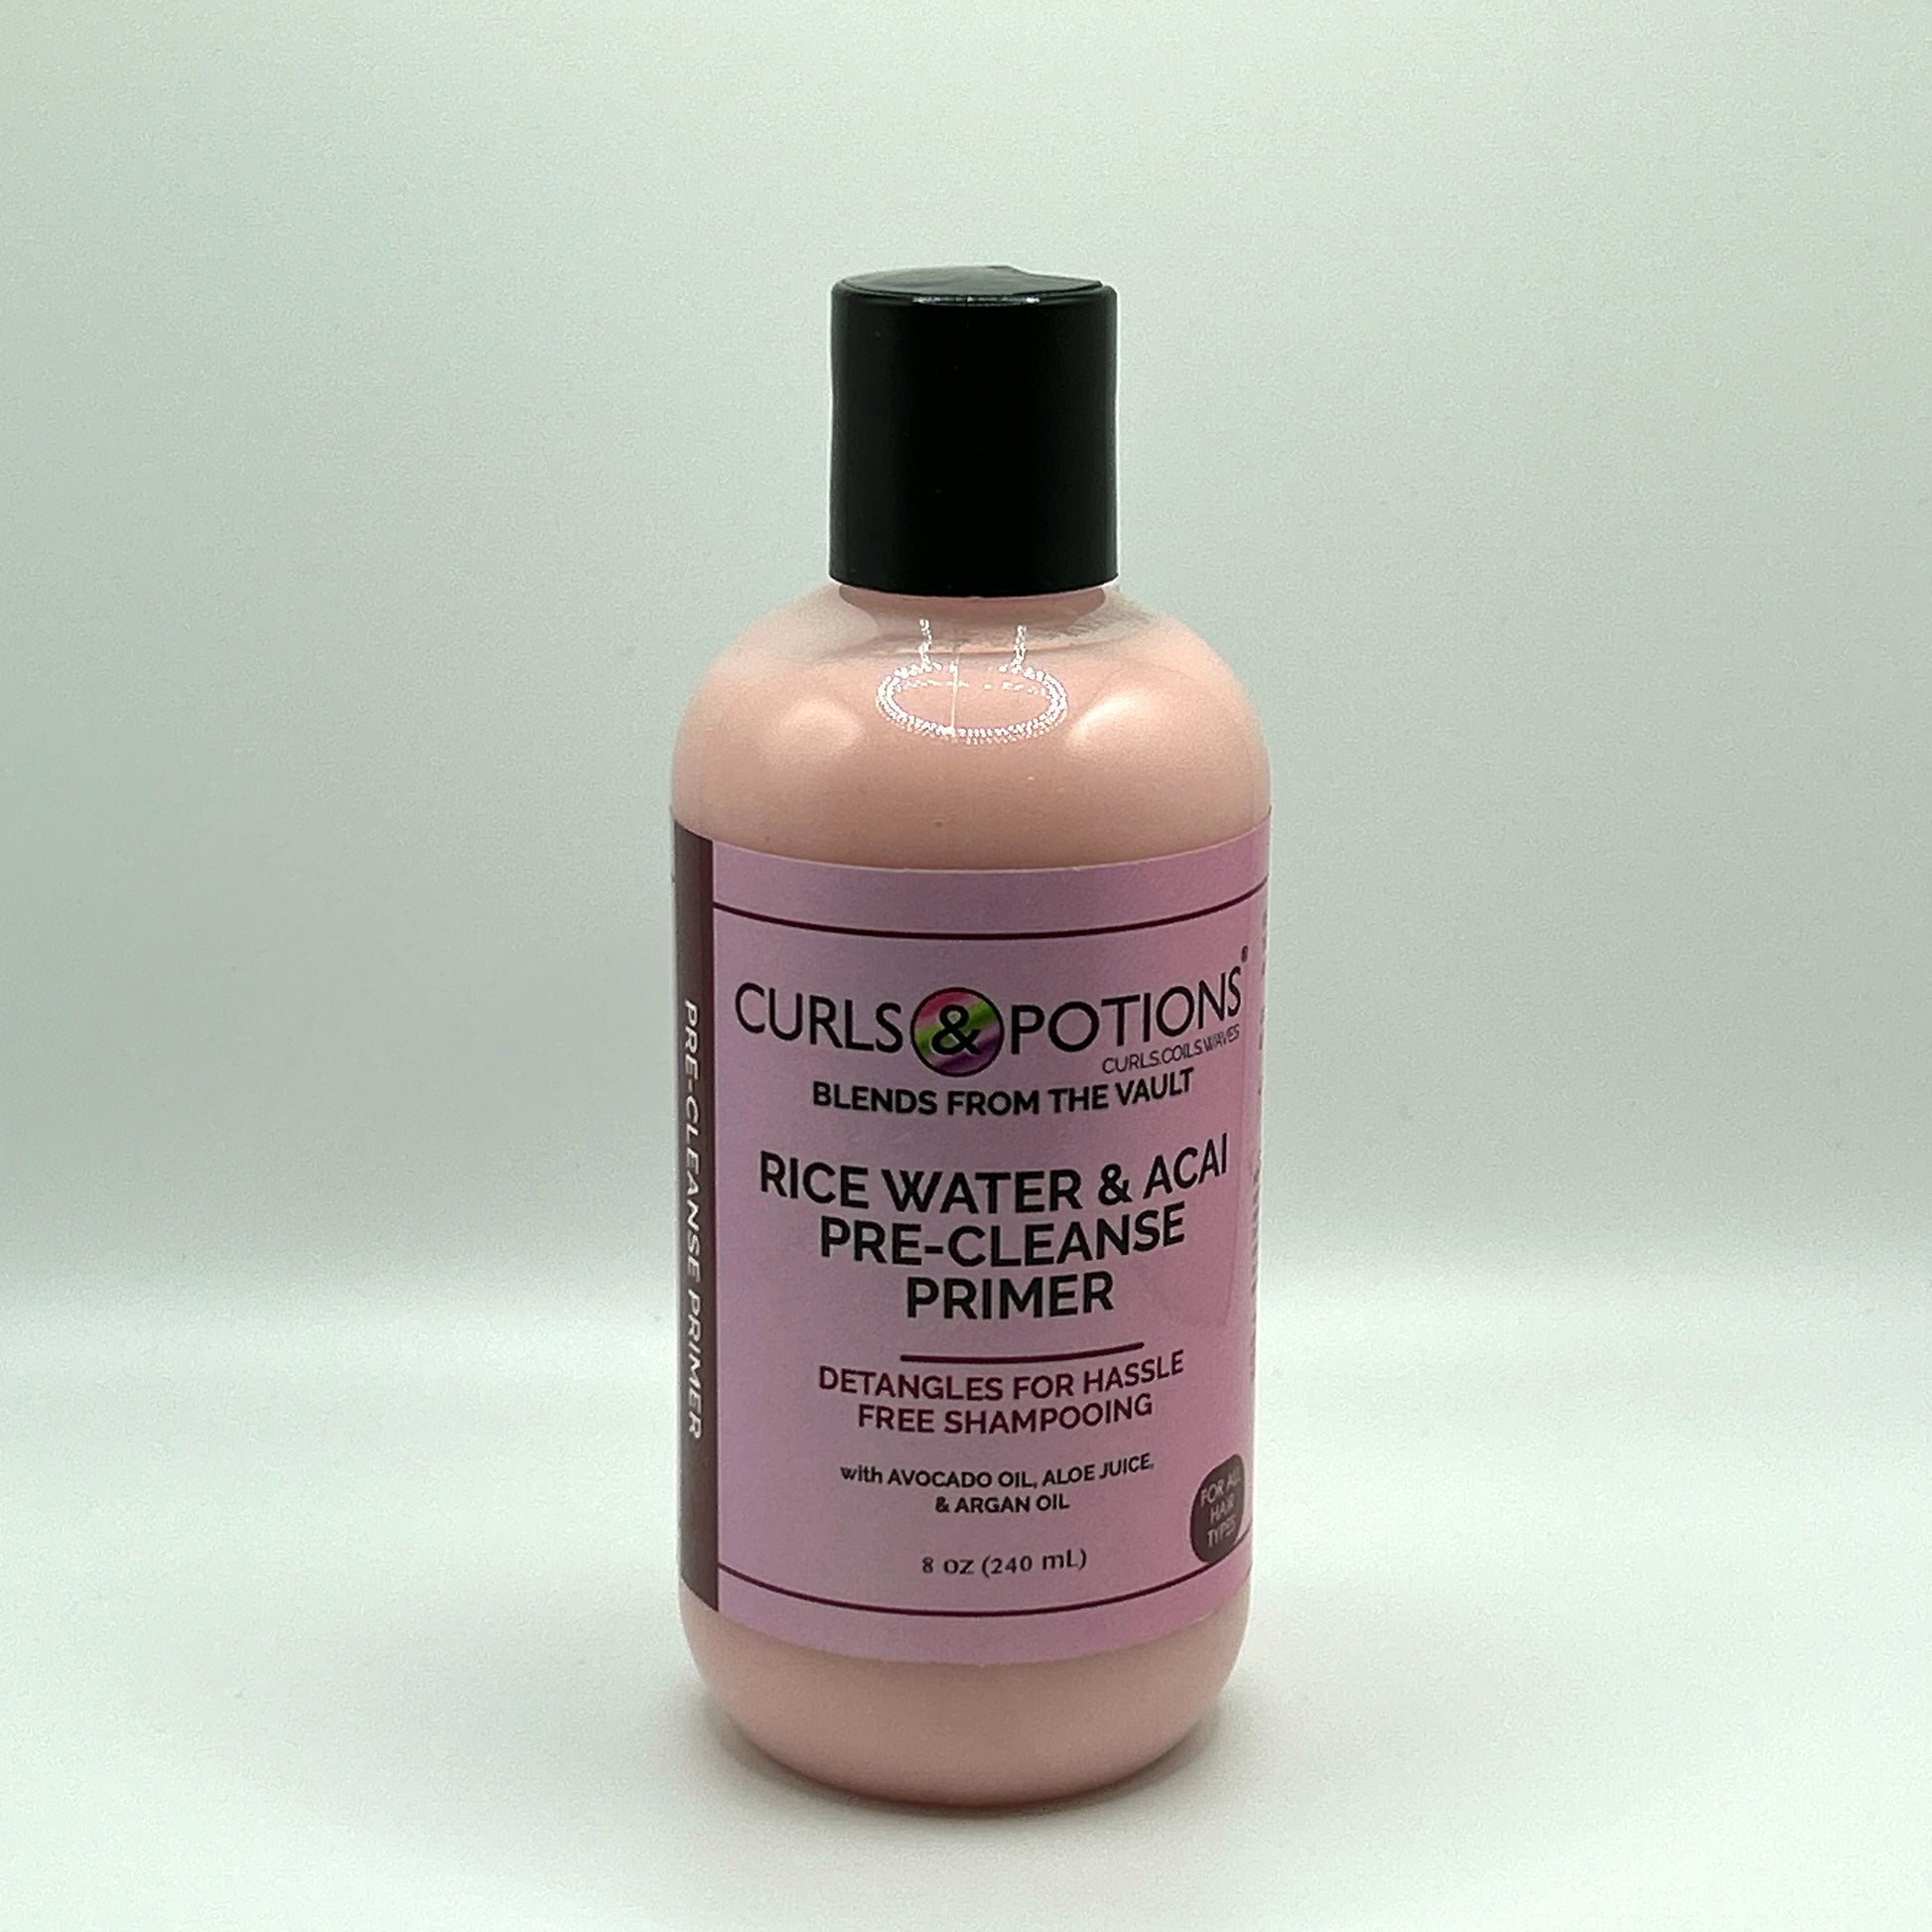    Curls & Potions Blends: Rice Water & Acai Pre-Cleanse  Primer